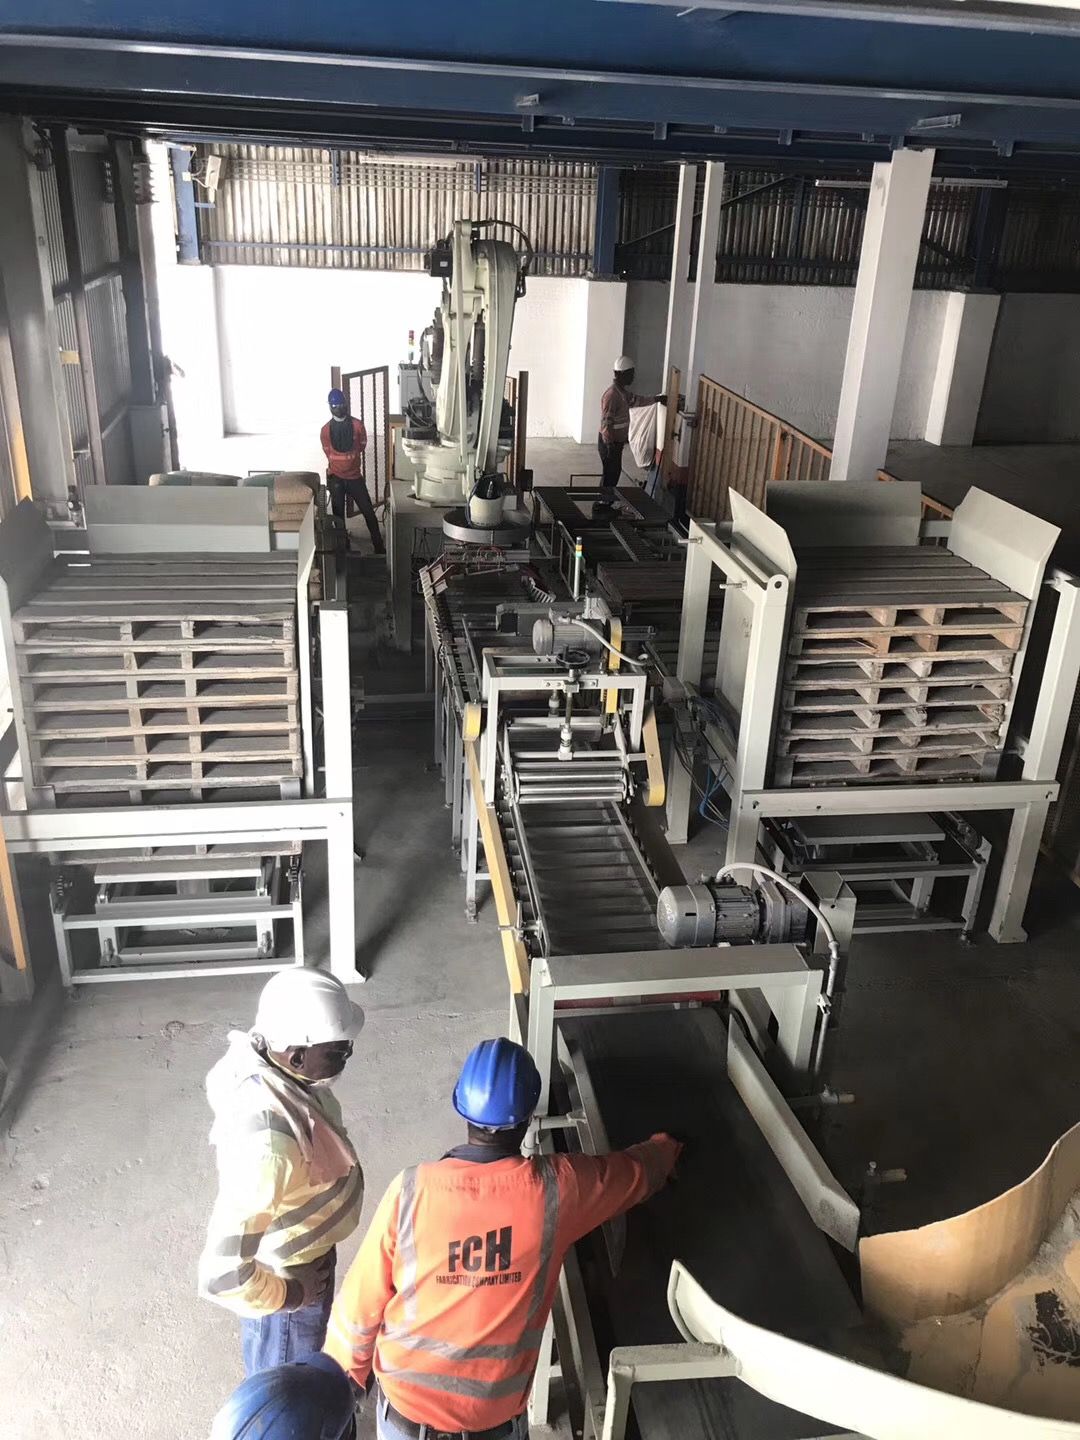 Maize and Wheat Fertilizer bagging machine Automated Bagging Line Fully Automatic Packing Palletizing Line, Fully Automatic Packing Line, Fully Automatic Bagging Line, Fully Automatic filling and pack